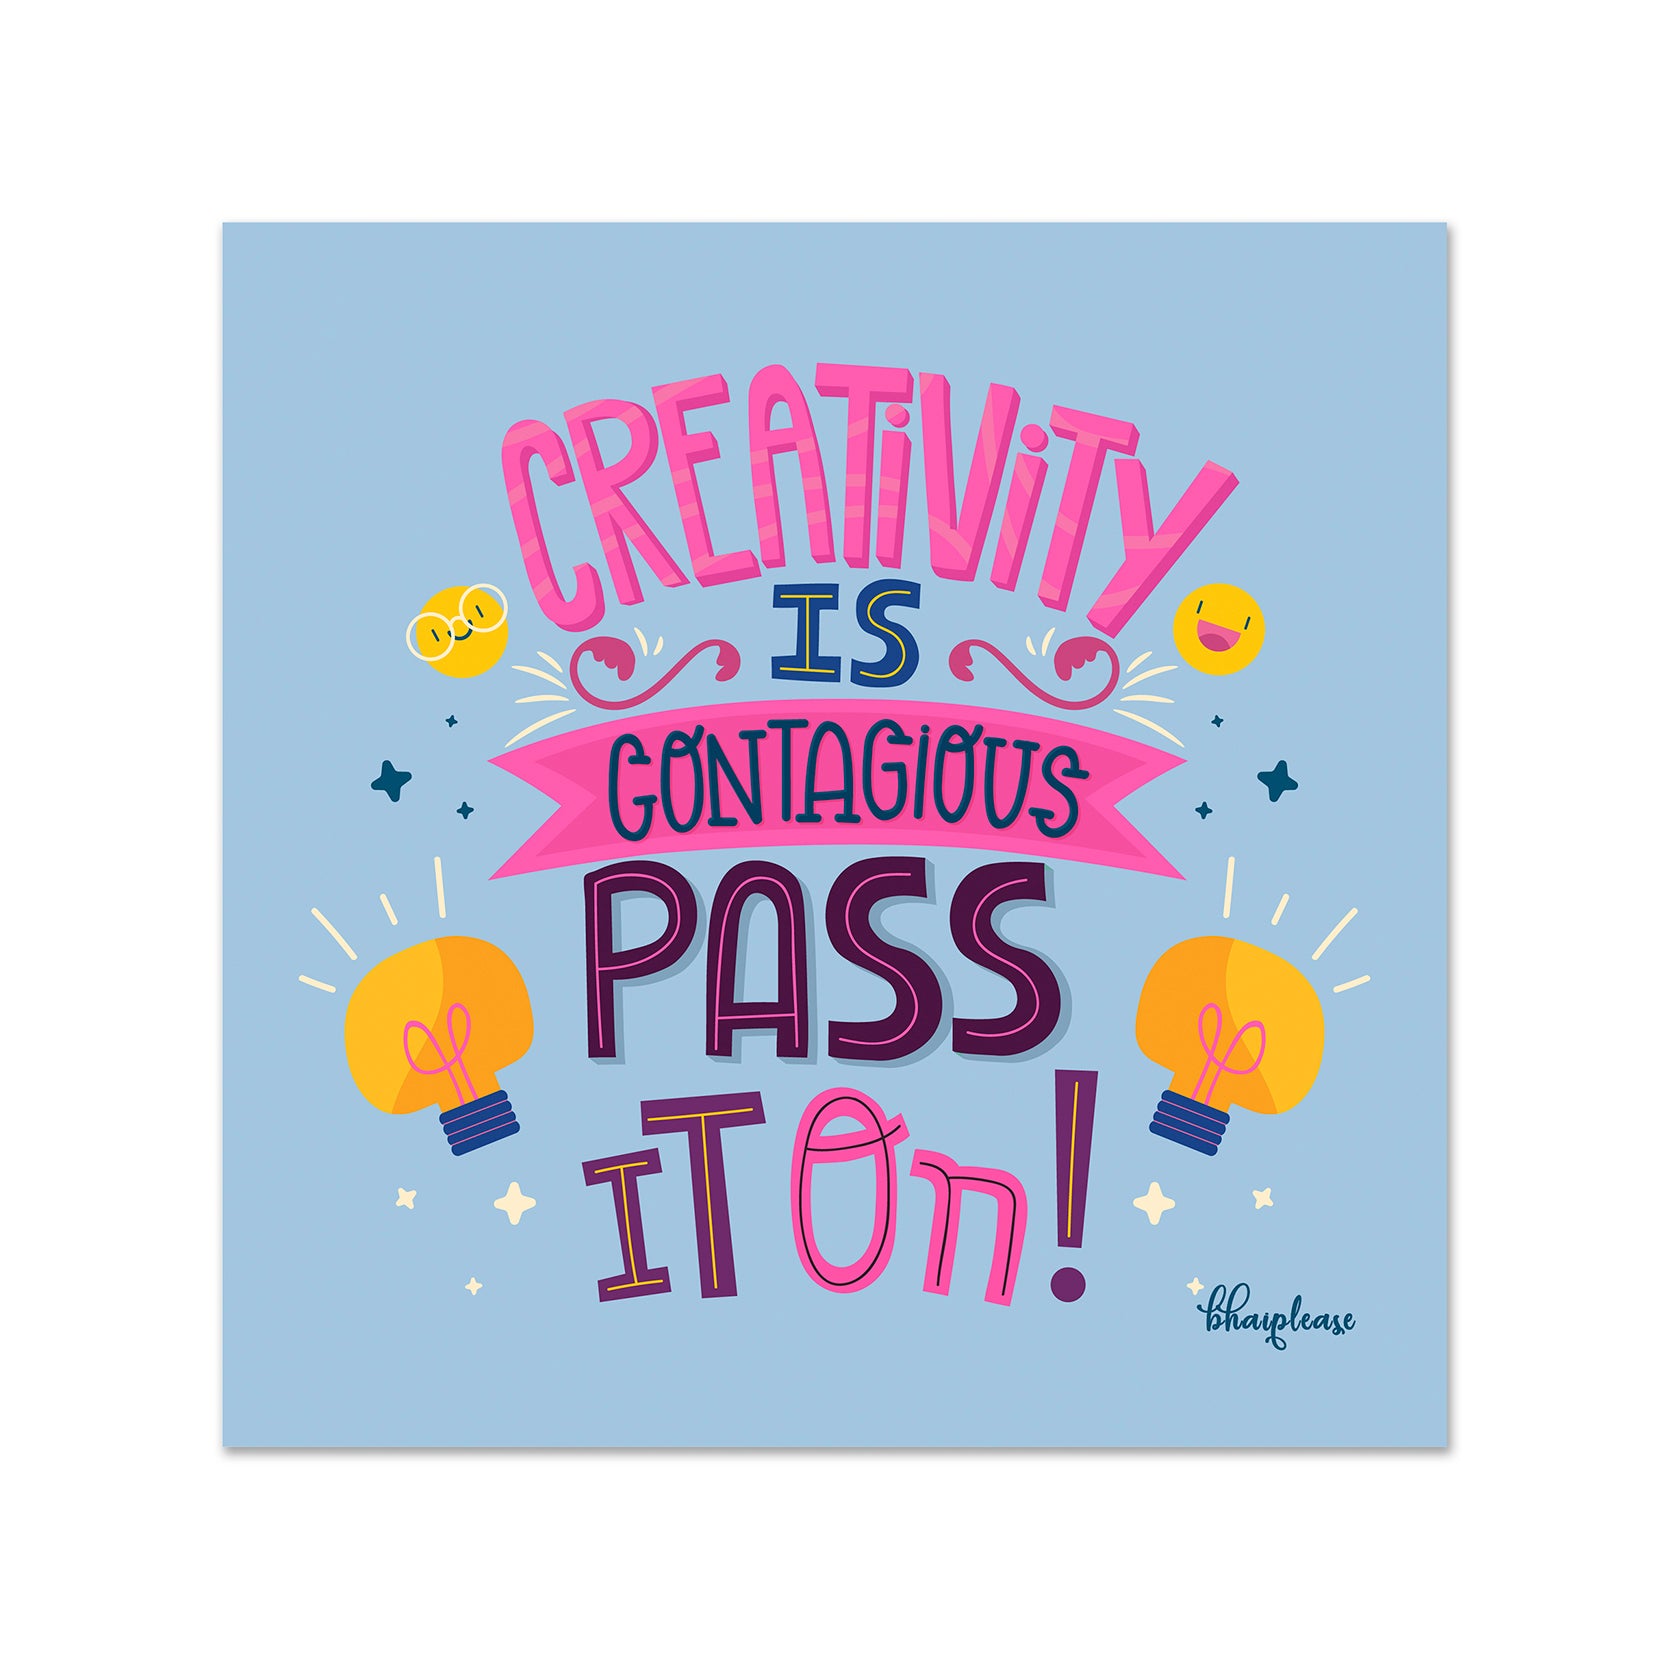 Creativity is Contagious Pass it on Wooden Fridge / Refrigerator Magnet